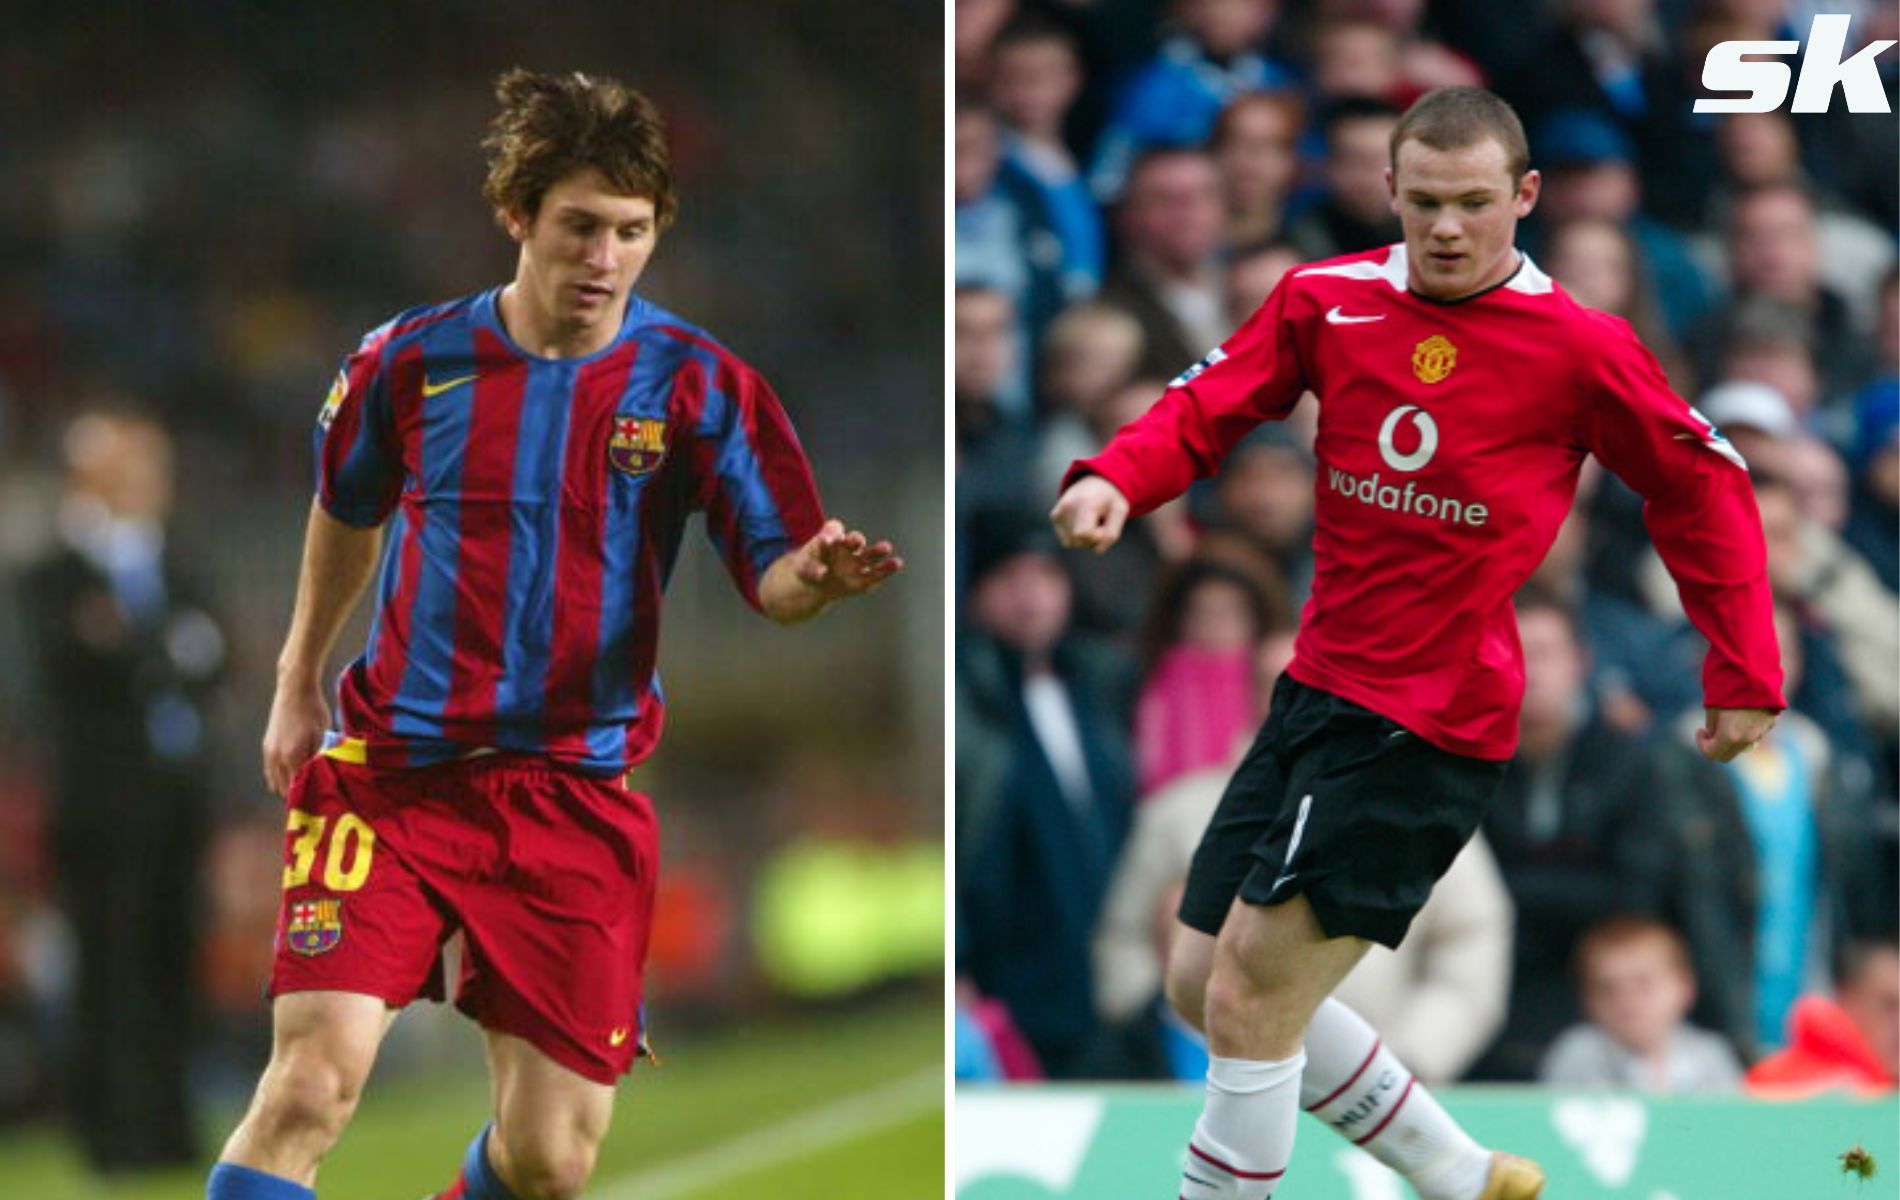 Lionel Messi (left) and Wayne Rooney are two of the greatest Golden Boy award winners.